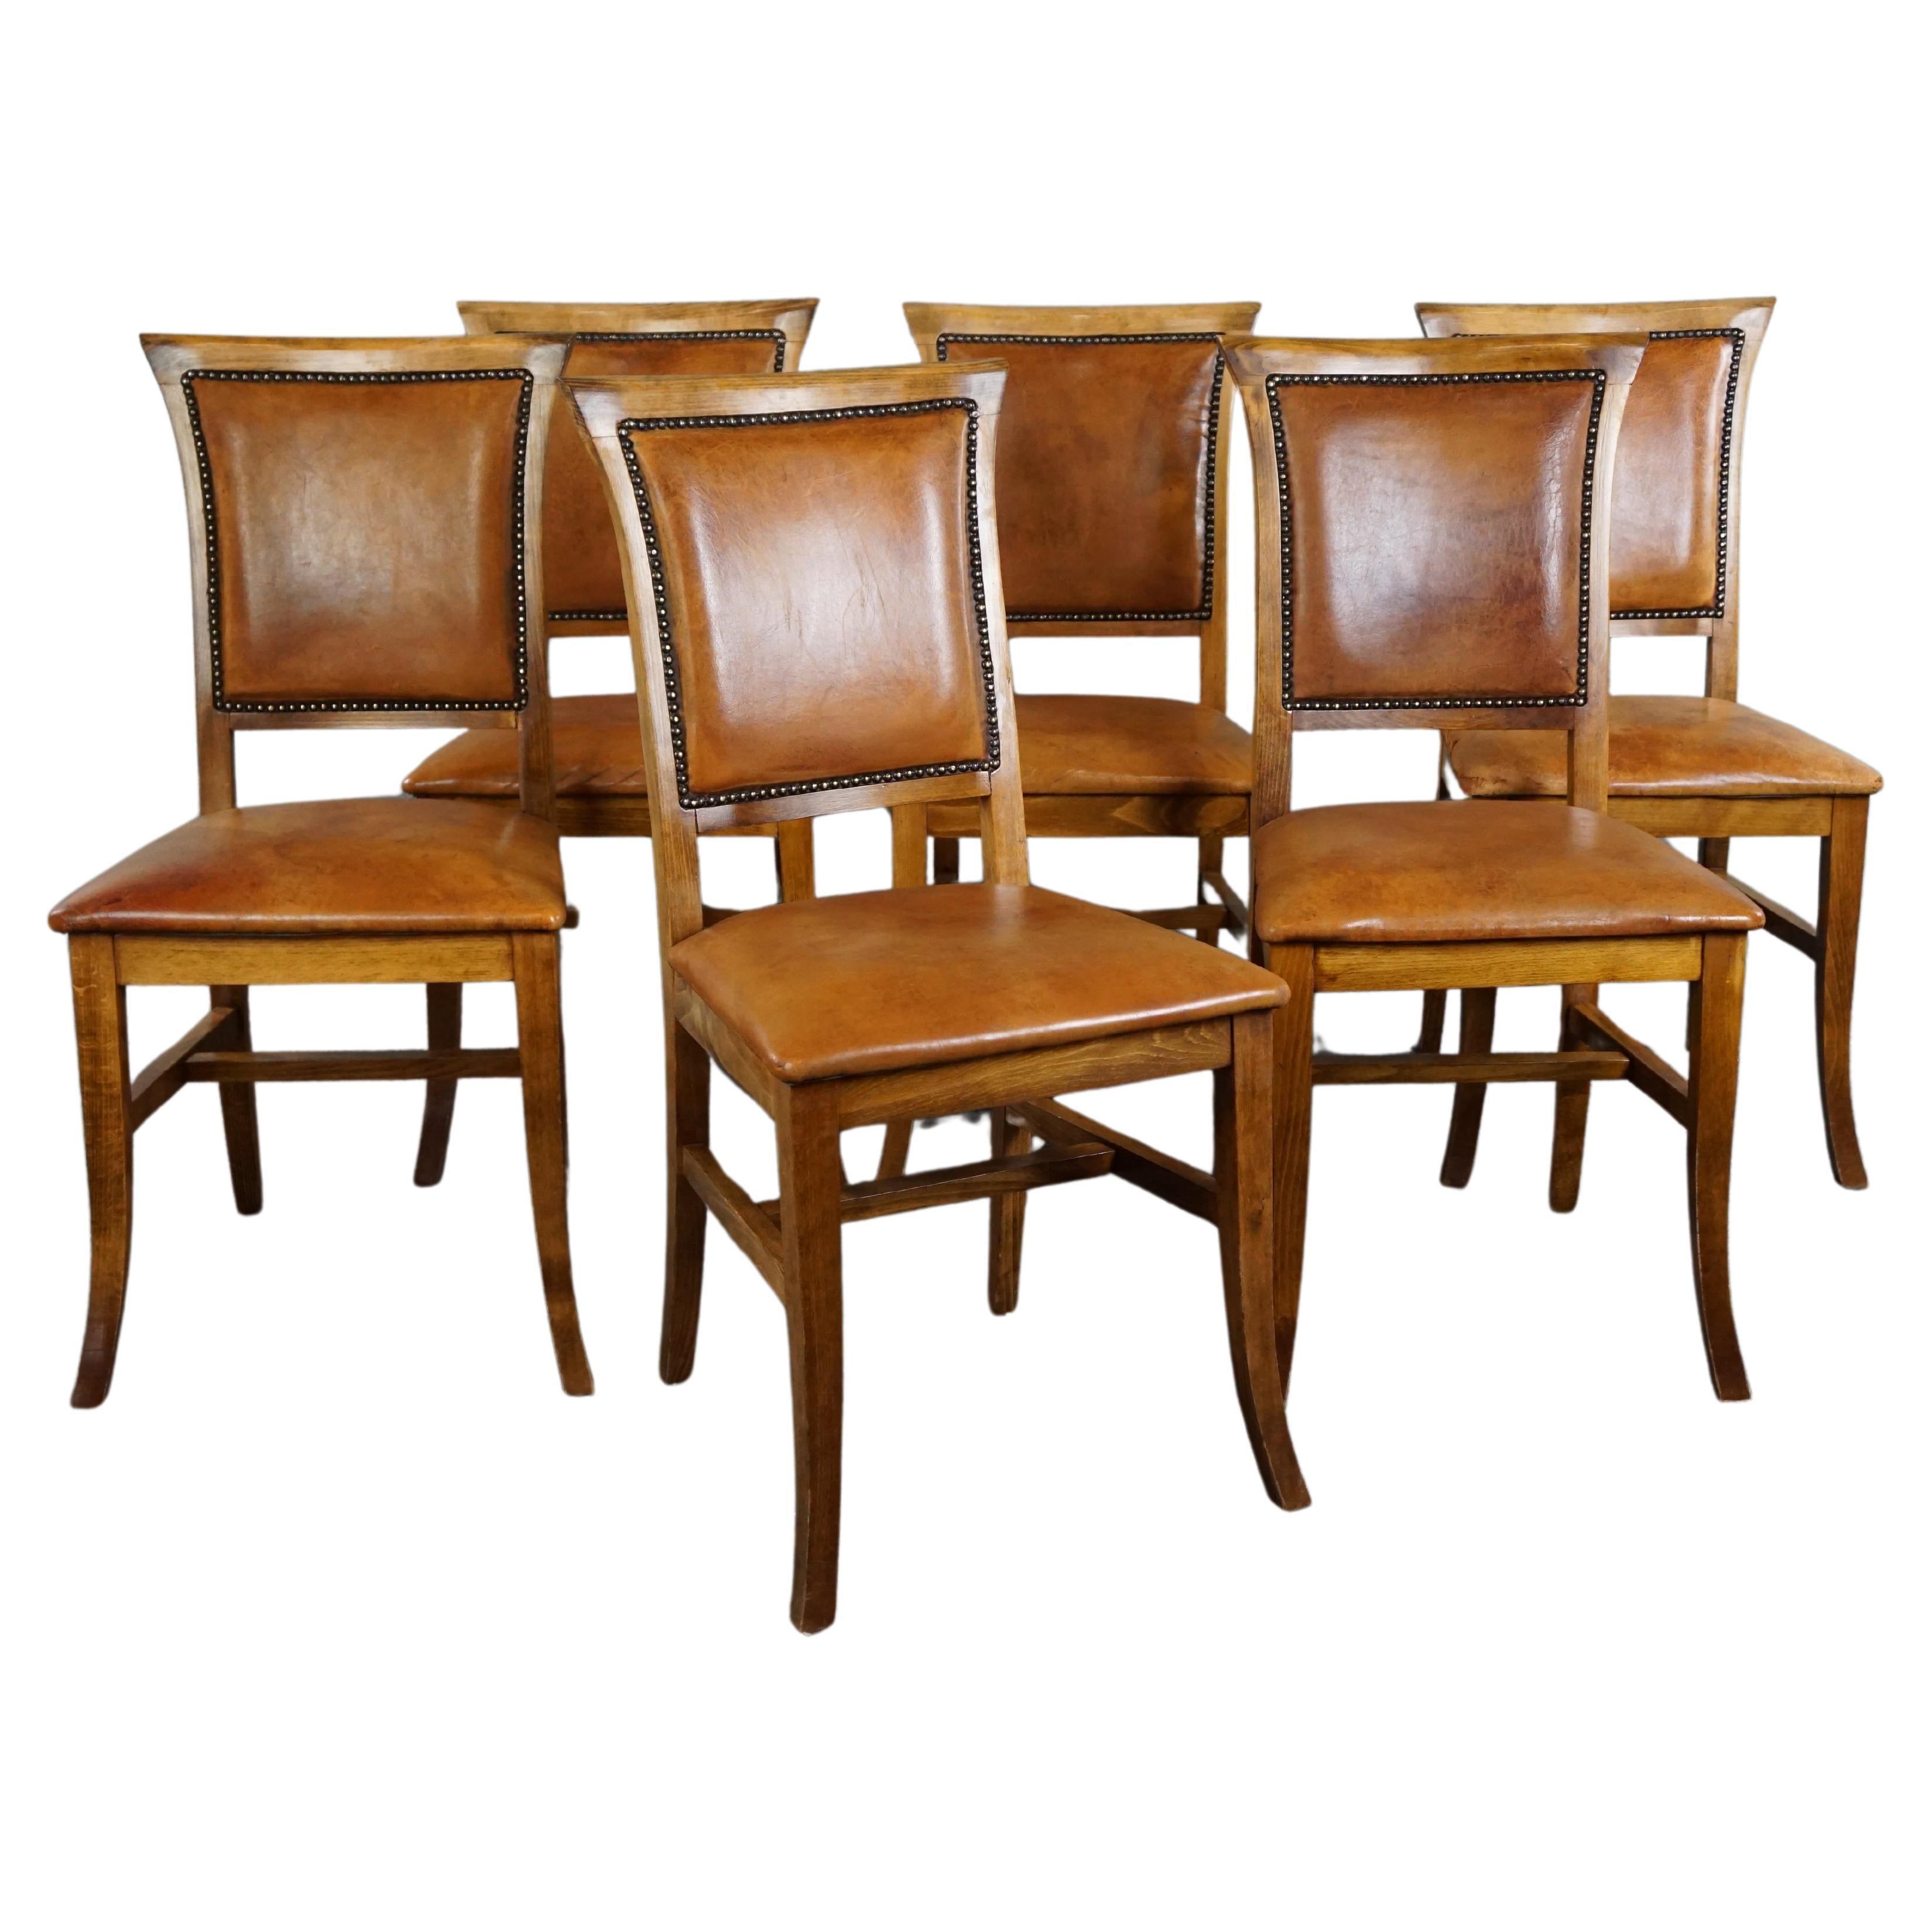 Set of six sheep leather dining chairs with a light wooden frame